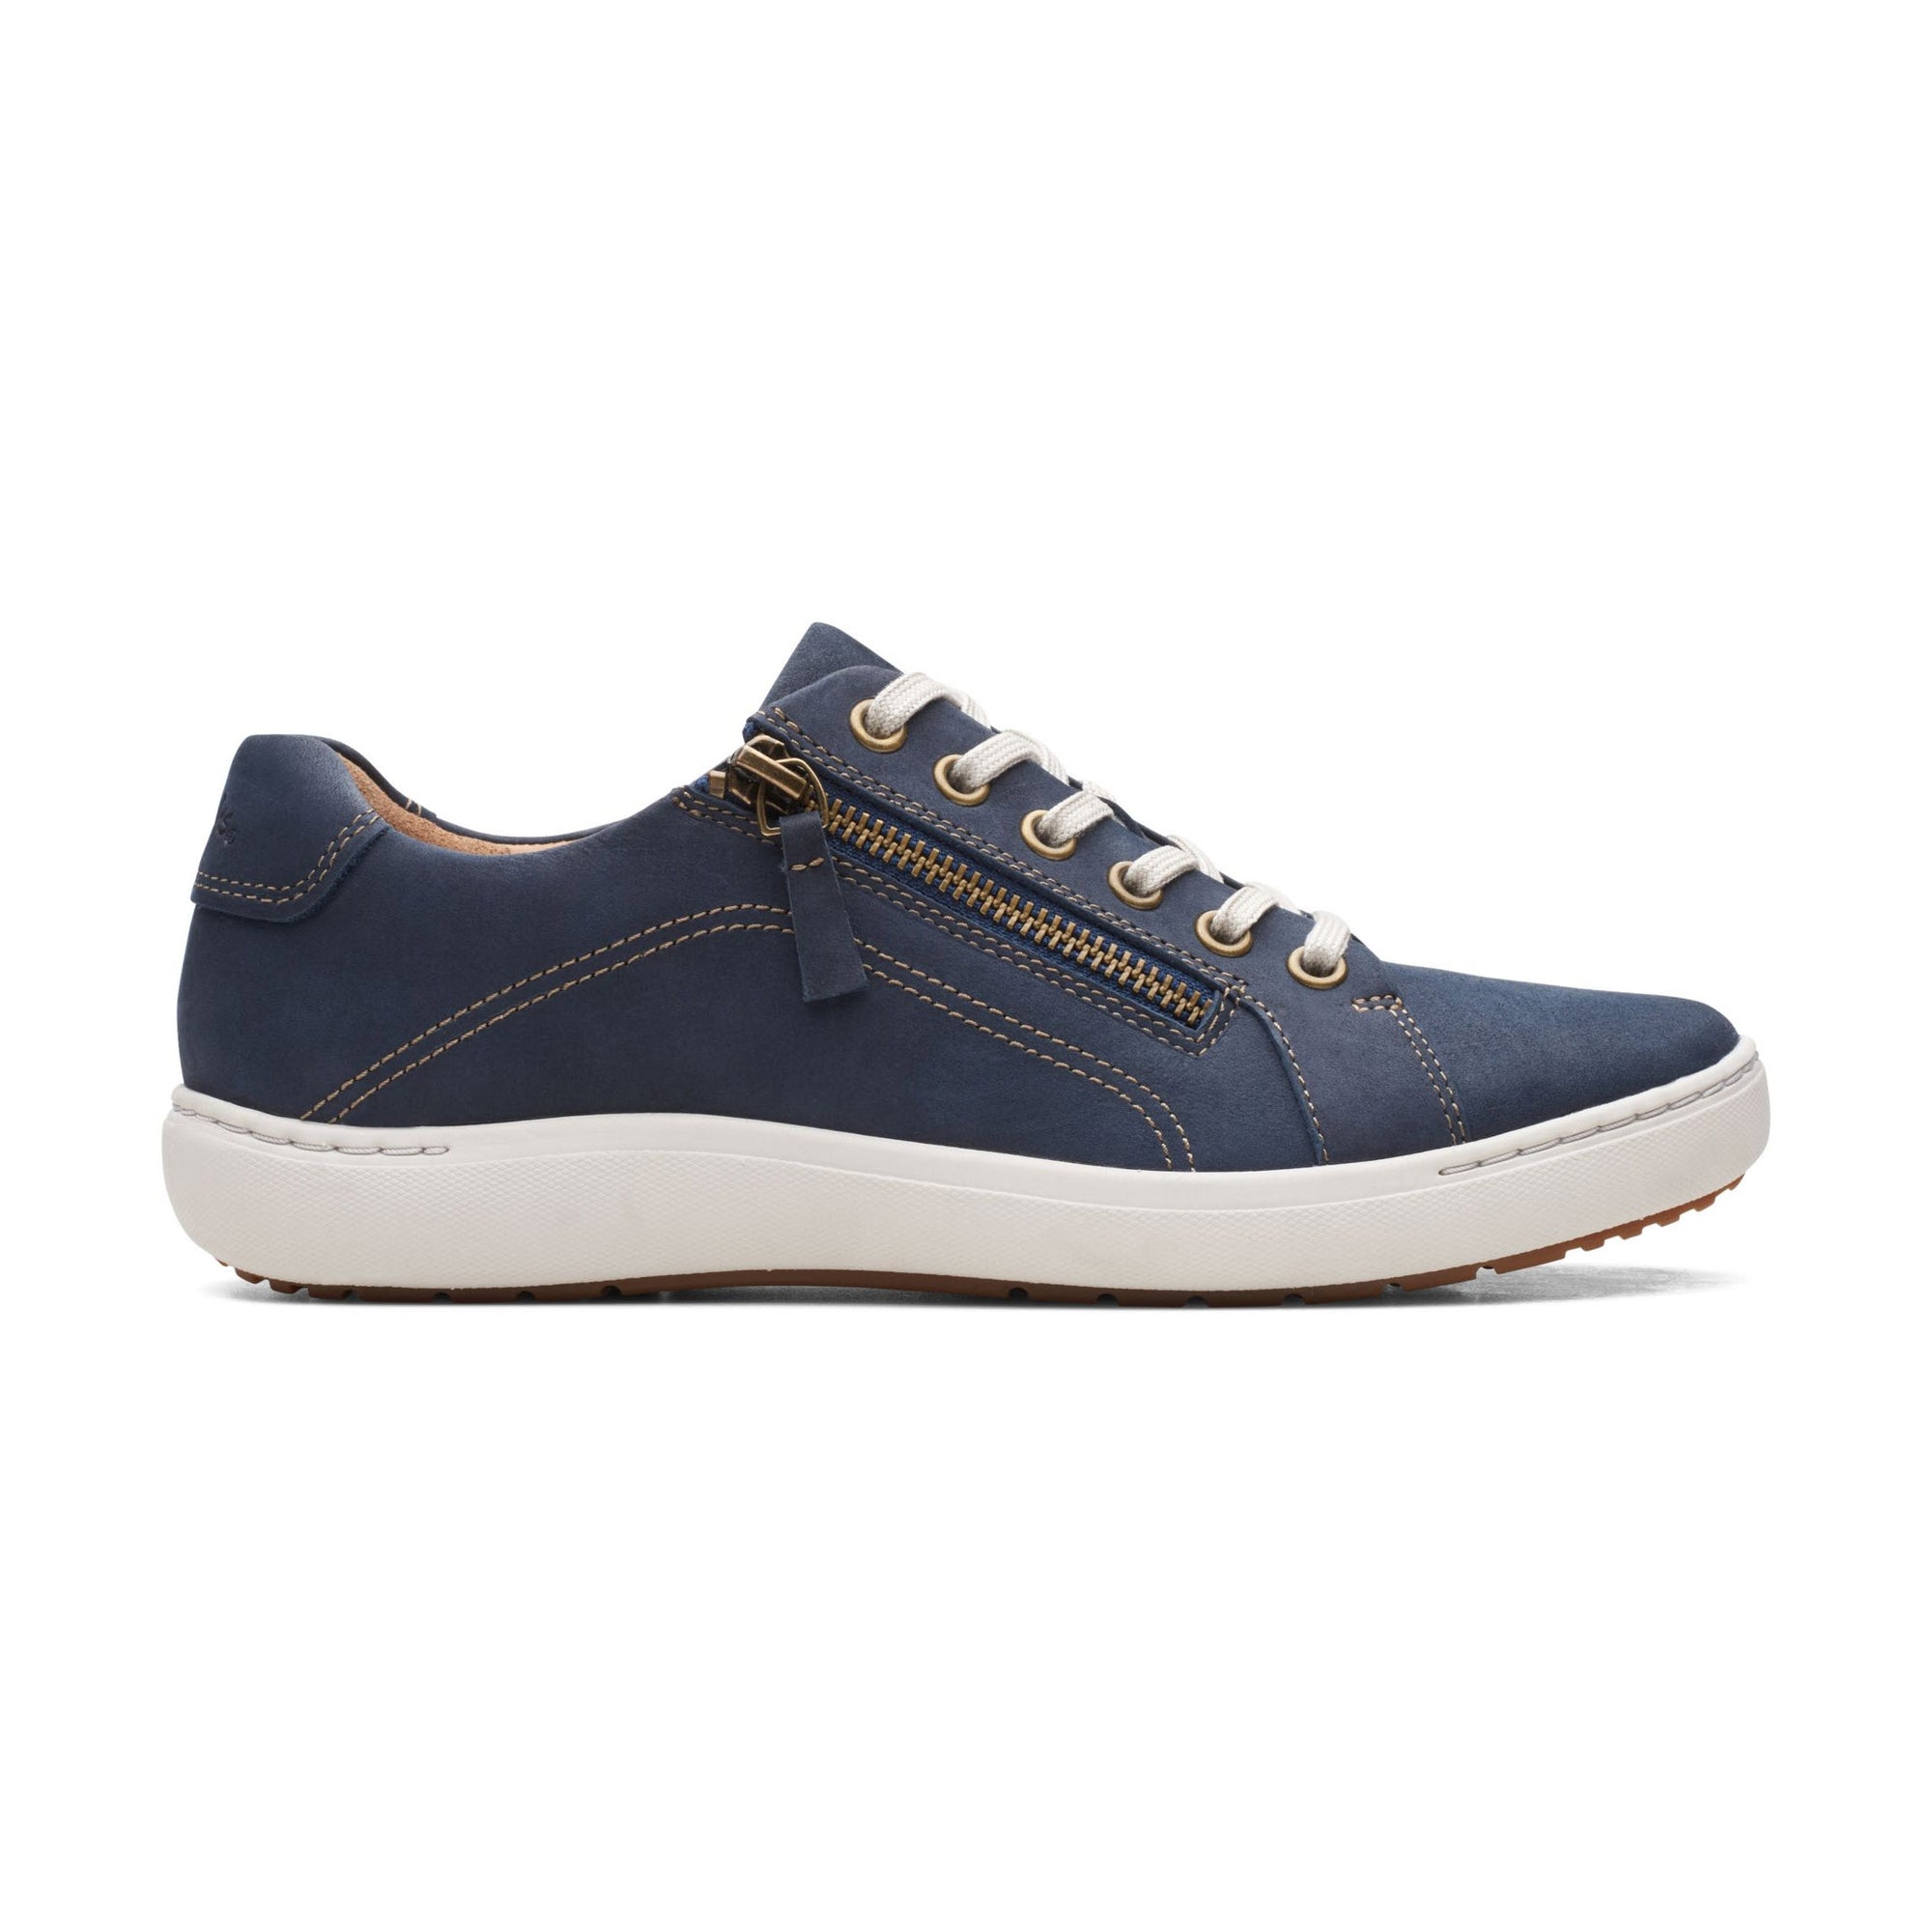 A single navy blue Clarks Nalle Lace sneaker with zipper detailing and a white sole, displayed against a white background.